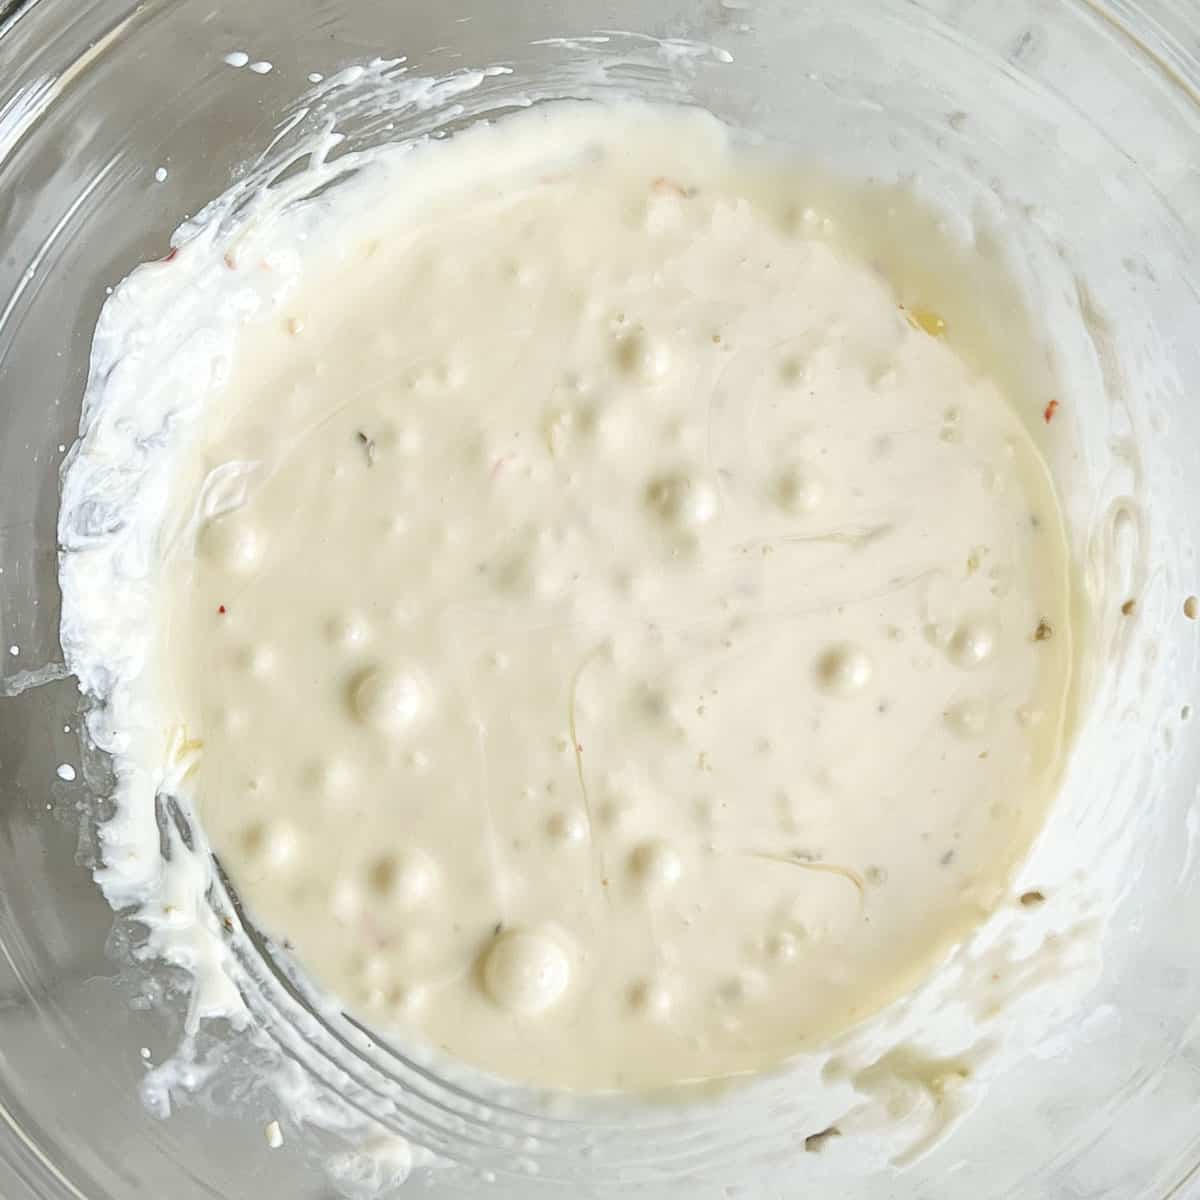 White Queso Dip almost melted after two minutes in microwave.